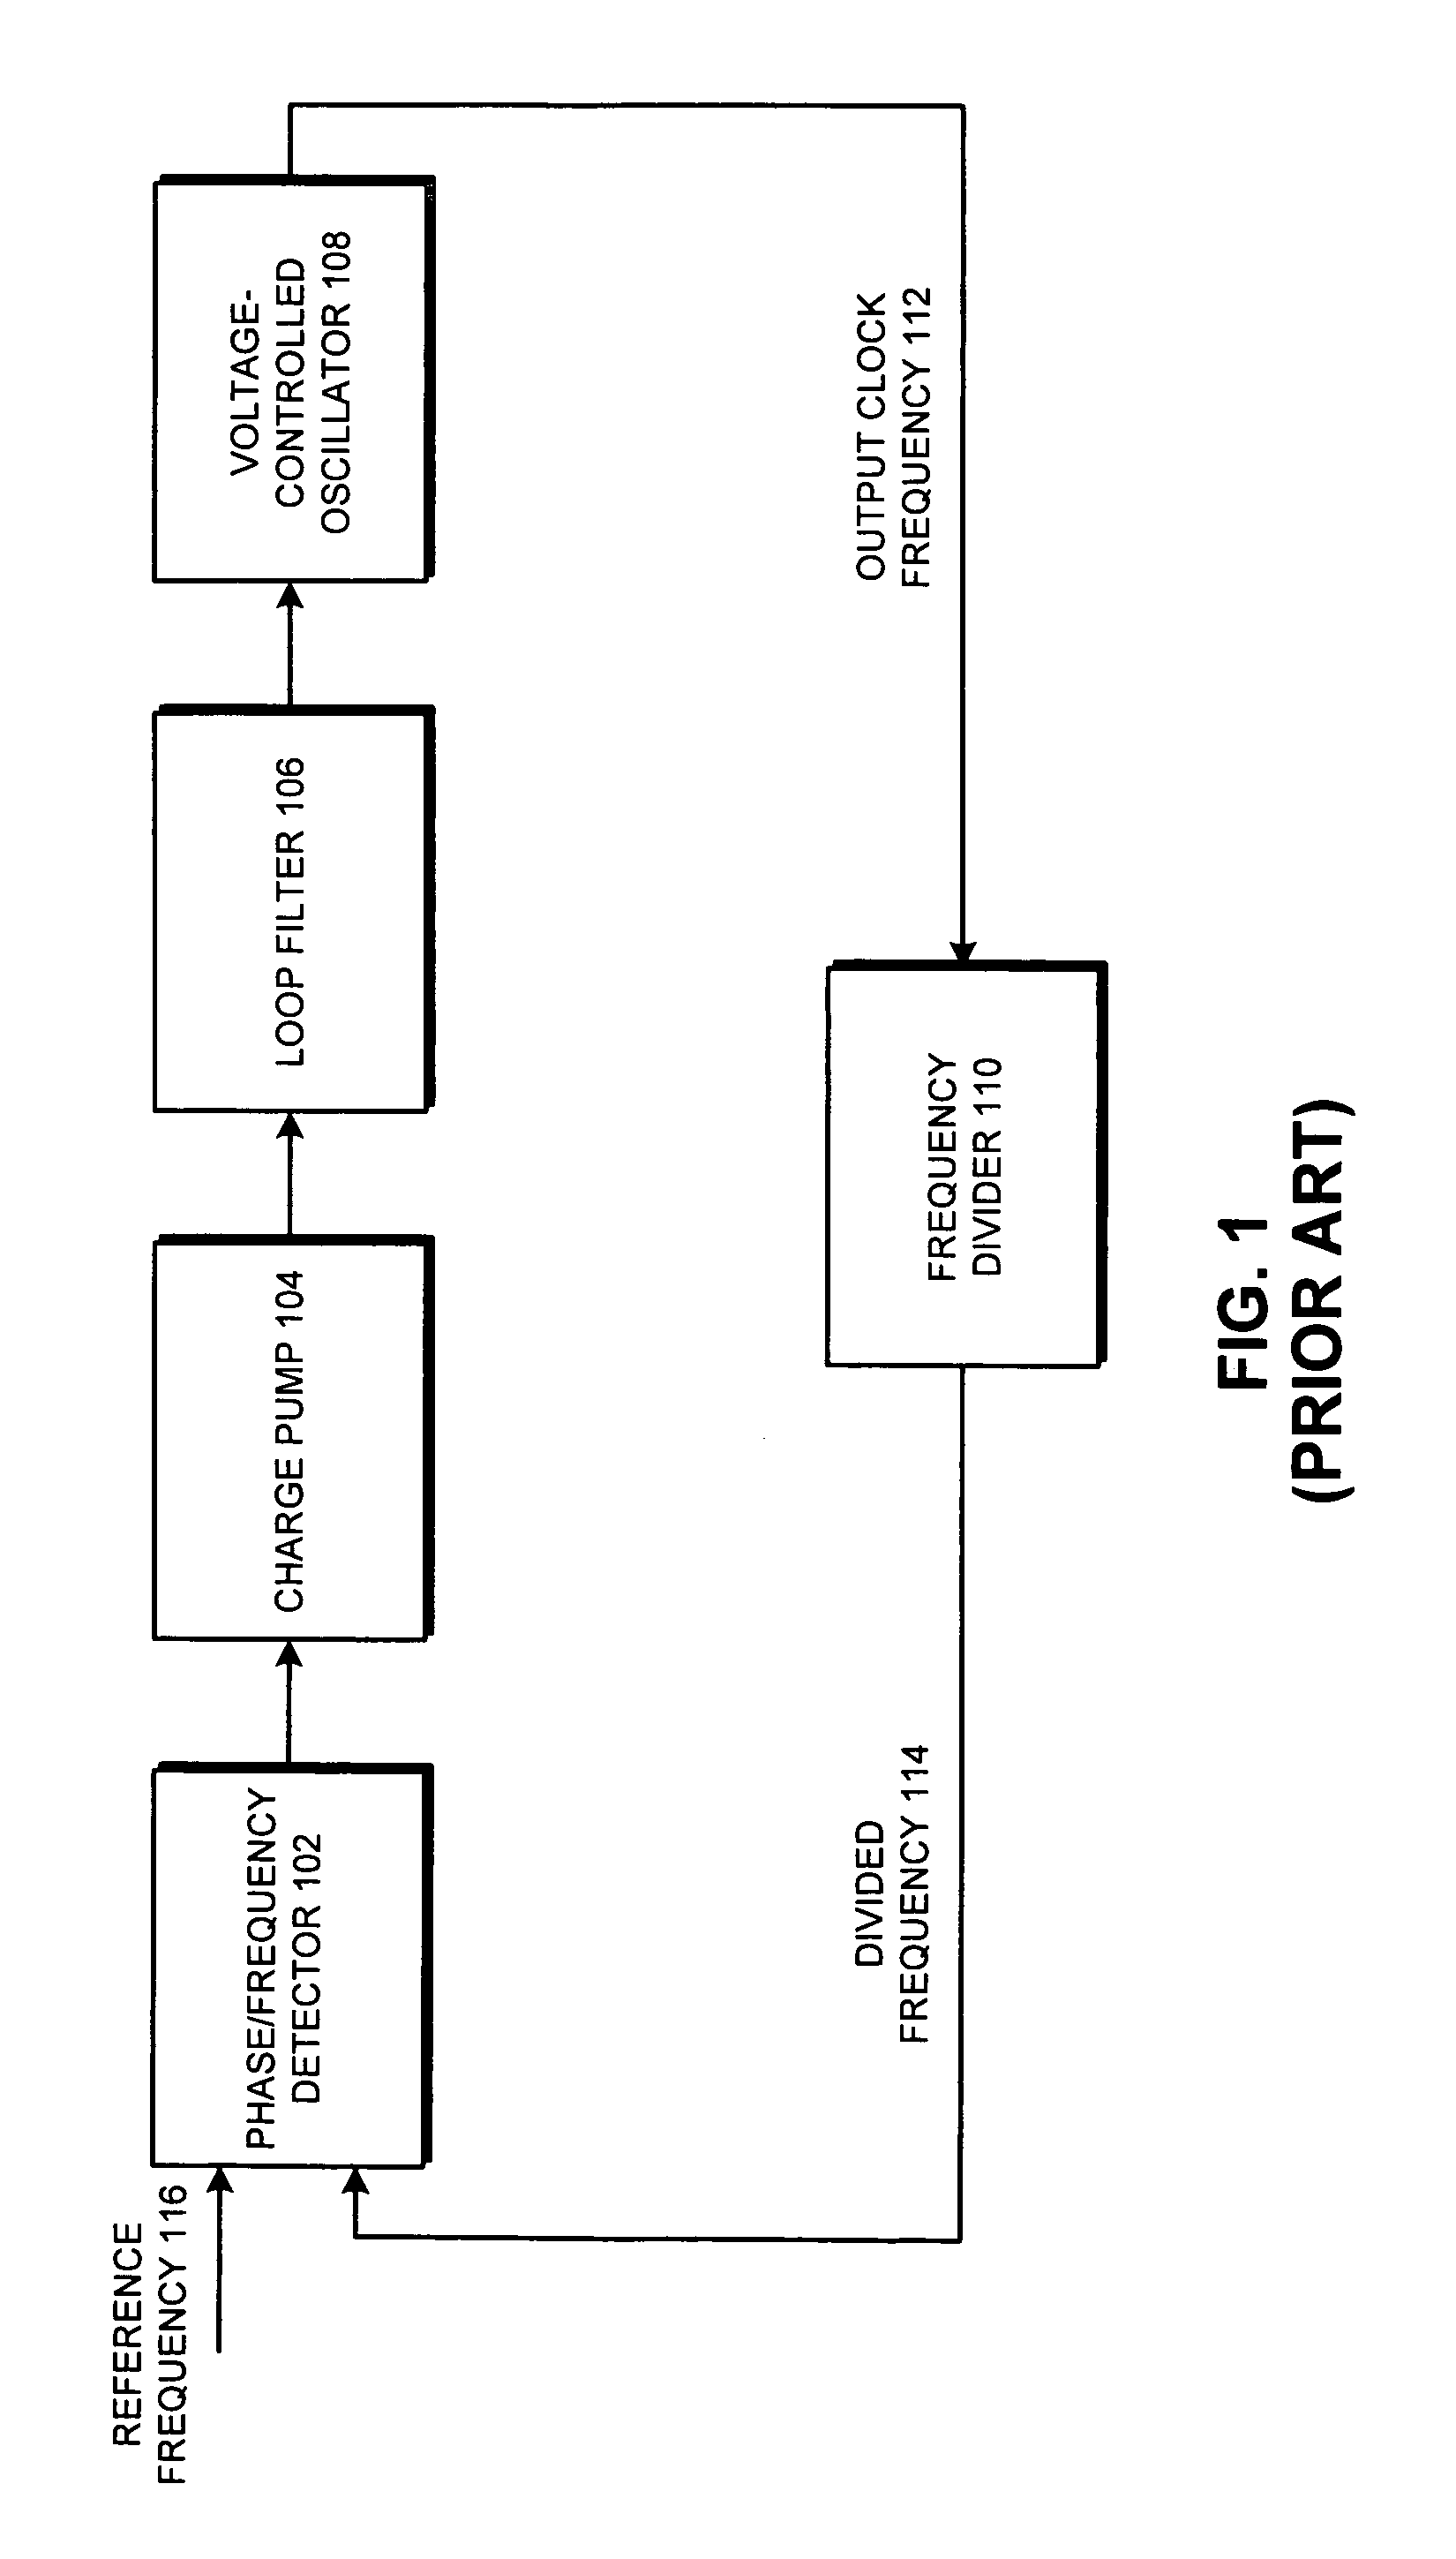 Method and apparatus for minimizing phase error and jitter in a phase-locked loop